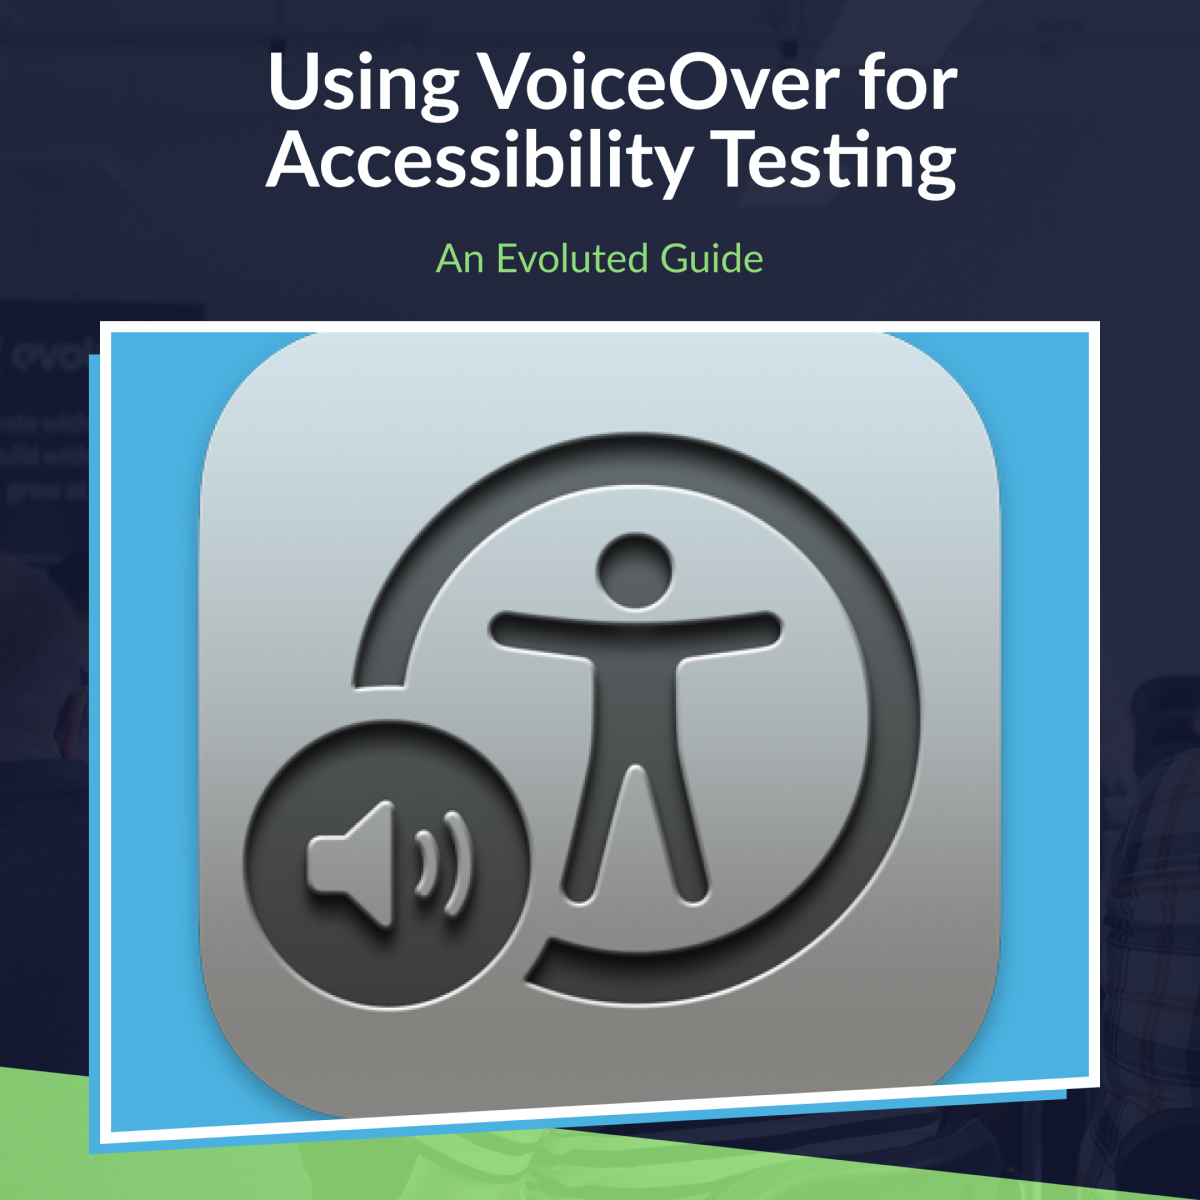 Evoluted's guide to using VoiceOver for accessibility testing